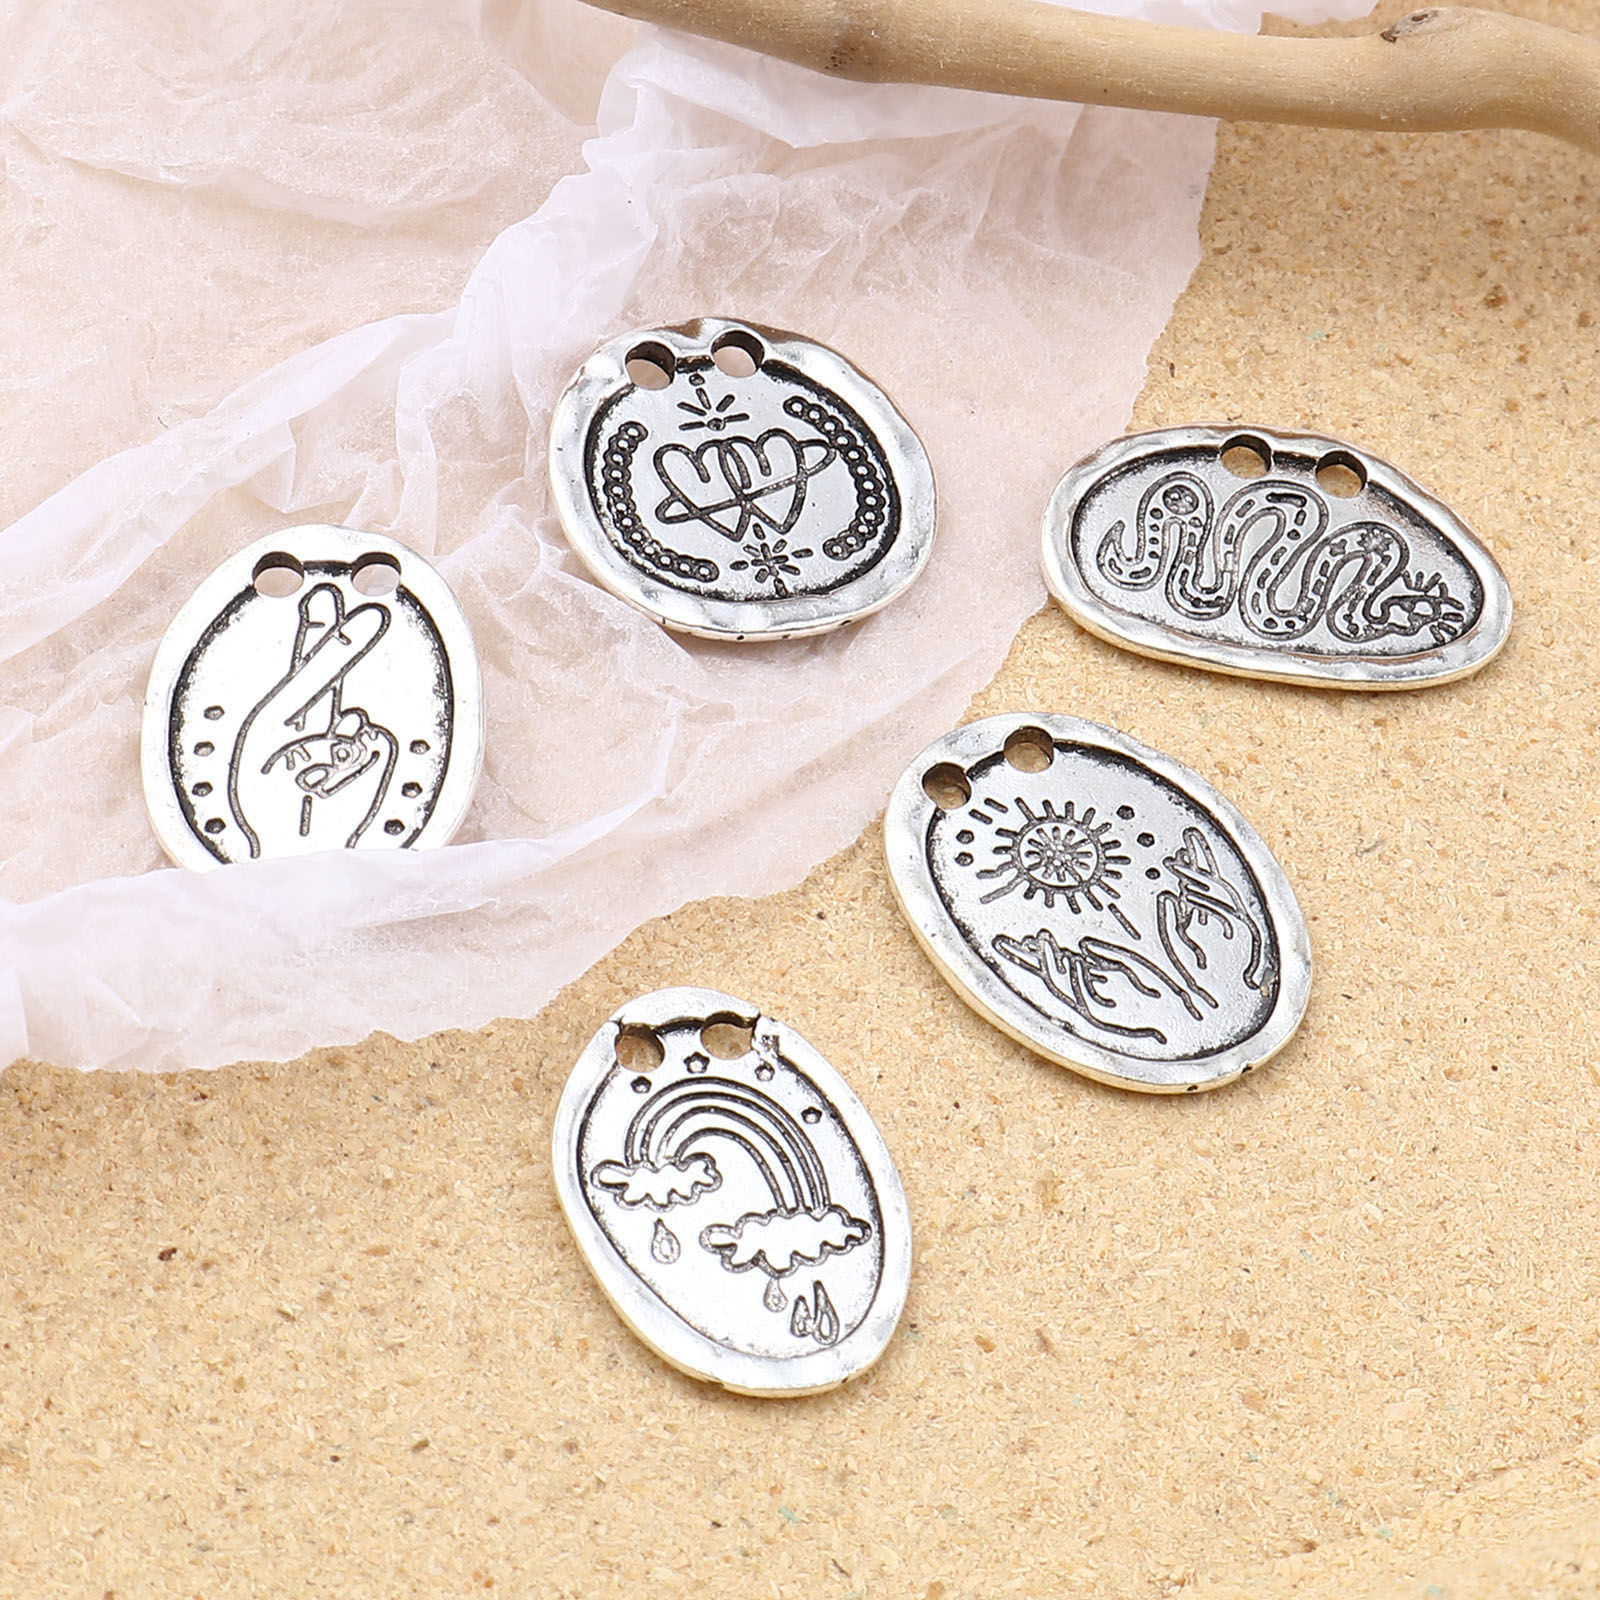 Picture of Zinc Based Alloy Two Hole Charms Oval Antique Silver Color Snake 24mm x 17mm, 10 PCs